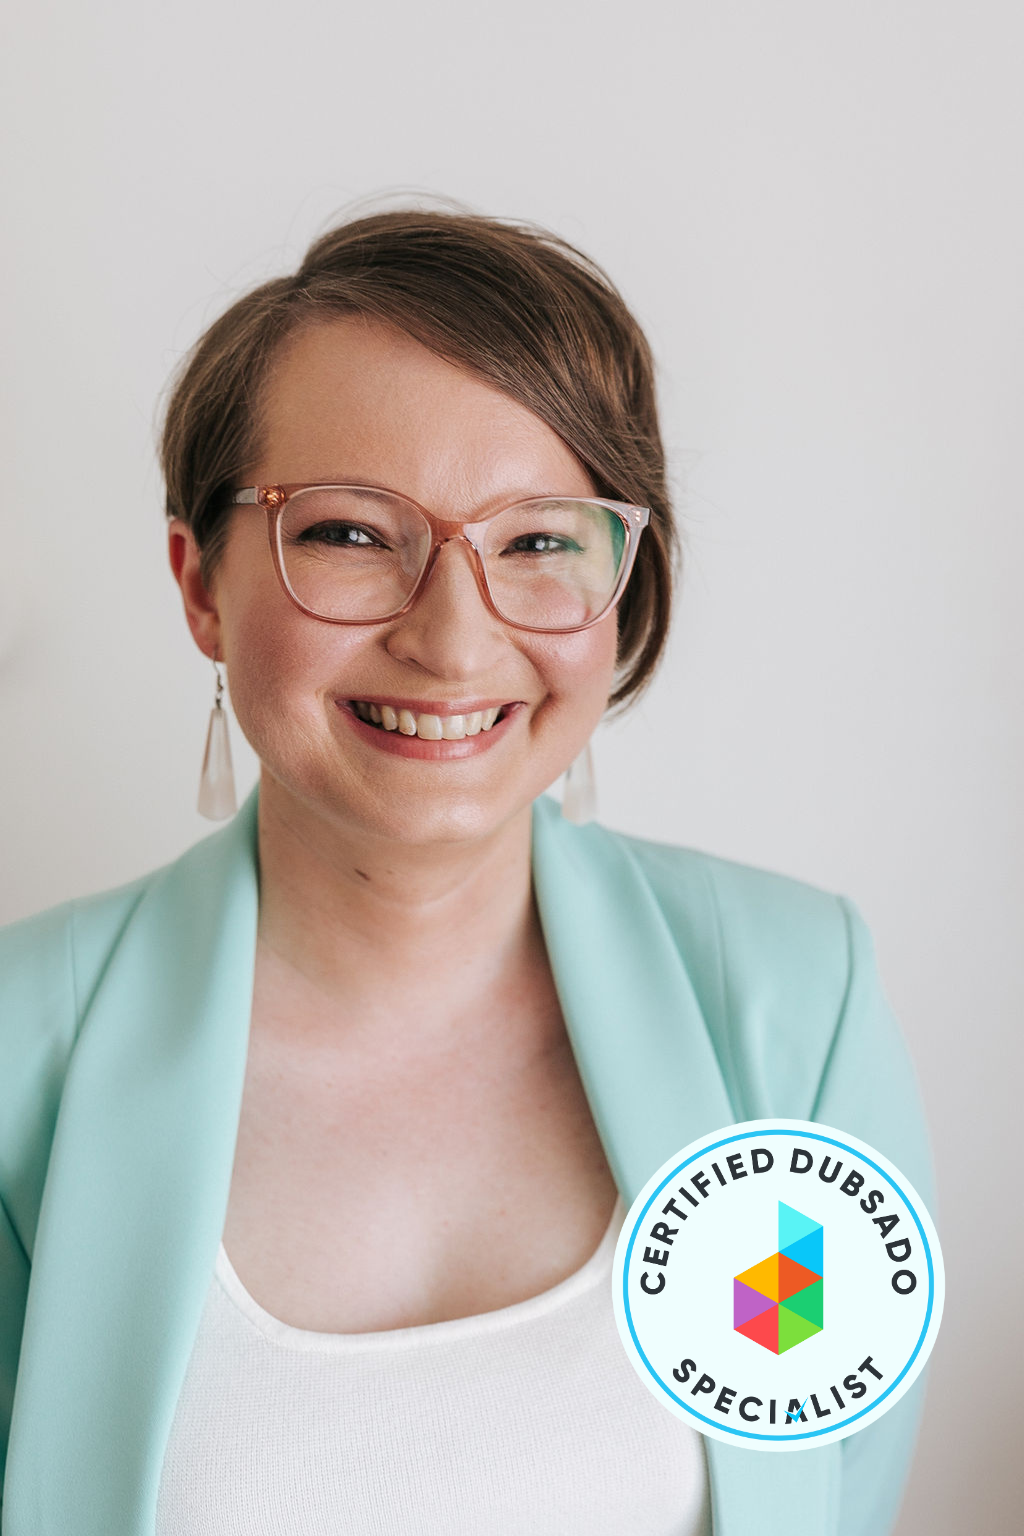 Christina is a light-skinned woman with short, light brown hair. She's wearing a light green blazer, glasses, and a wide smile. In the foreground is the Certified Dubsado Specialist badge.